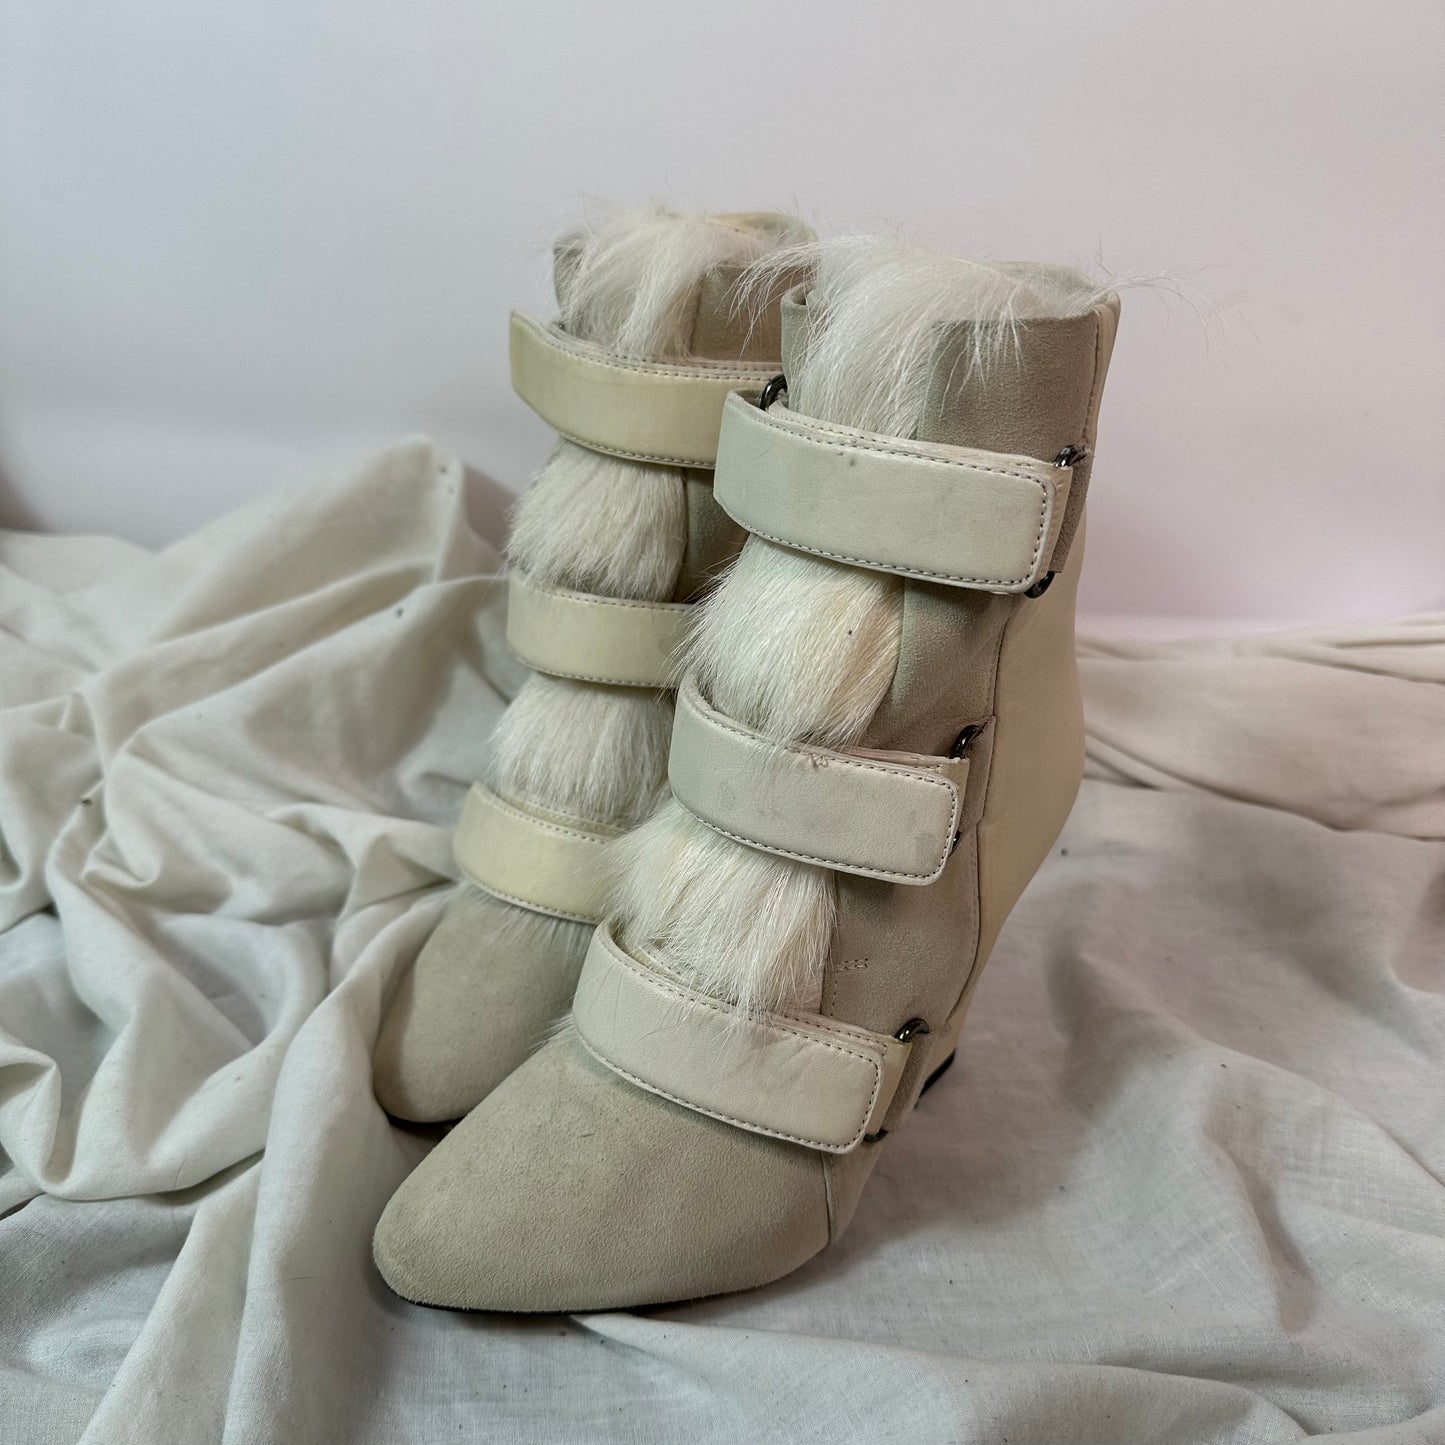 Isabel Marant AW13 Wedge Fur Boots 35